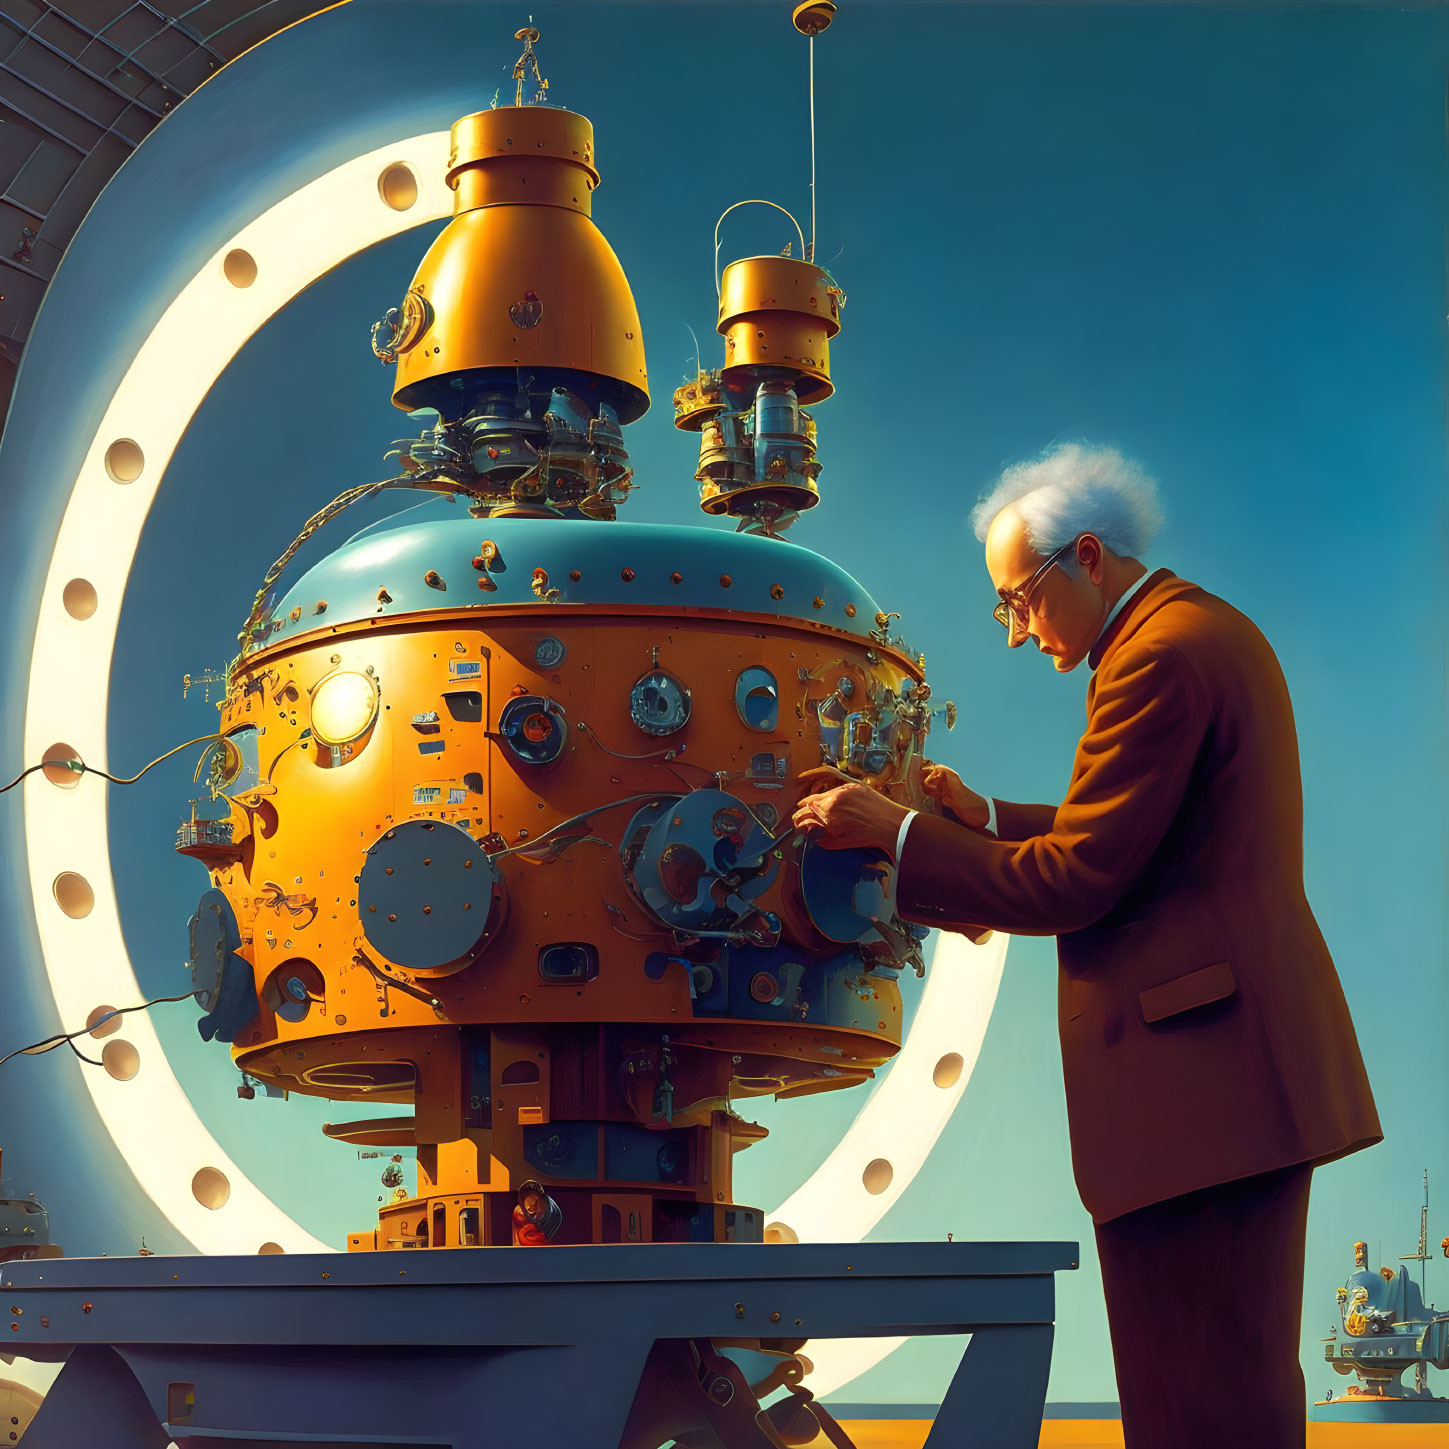 White-haired man adjusts knobs on spherical retro-futuristic machine with pipes and gauges in warm light